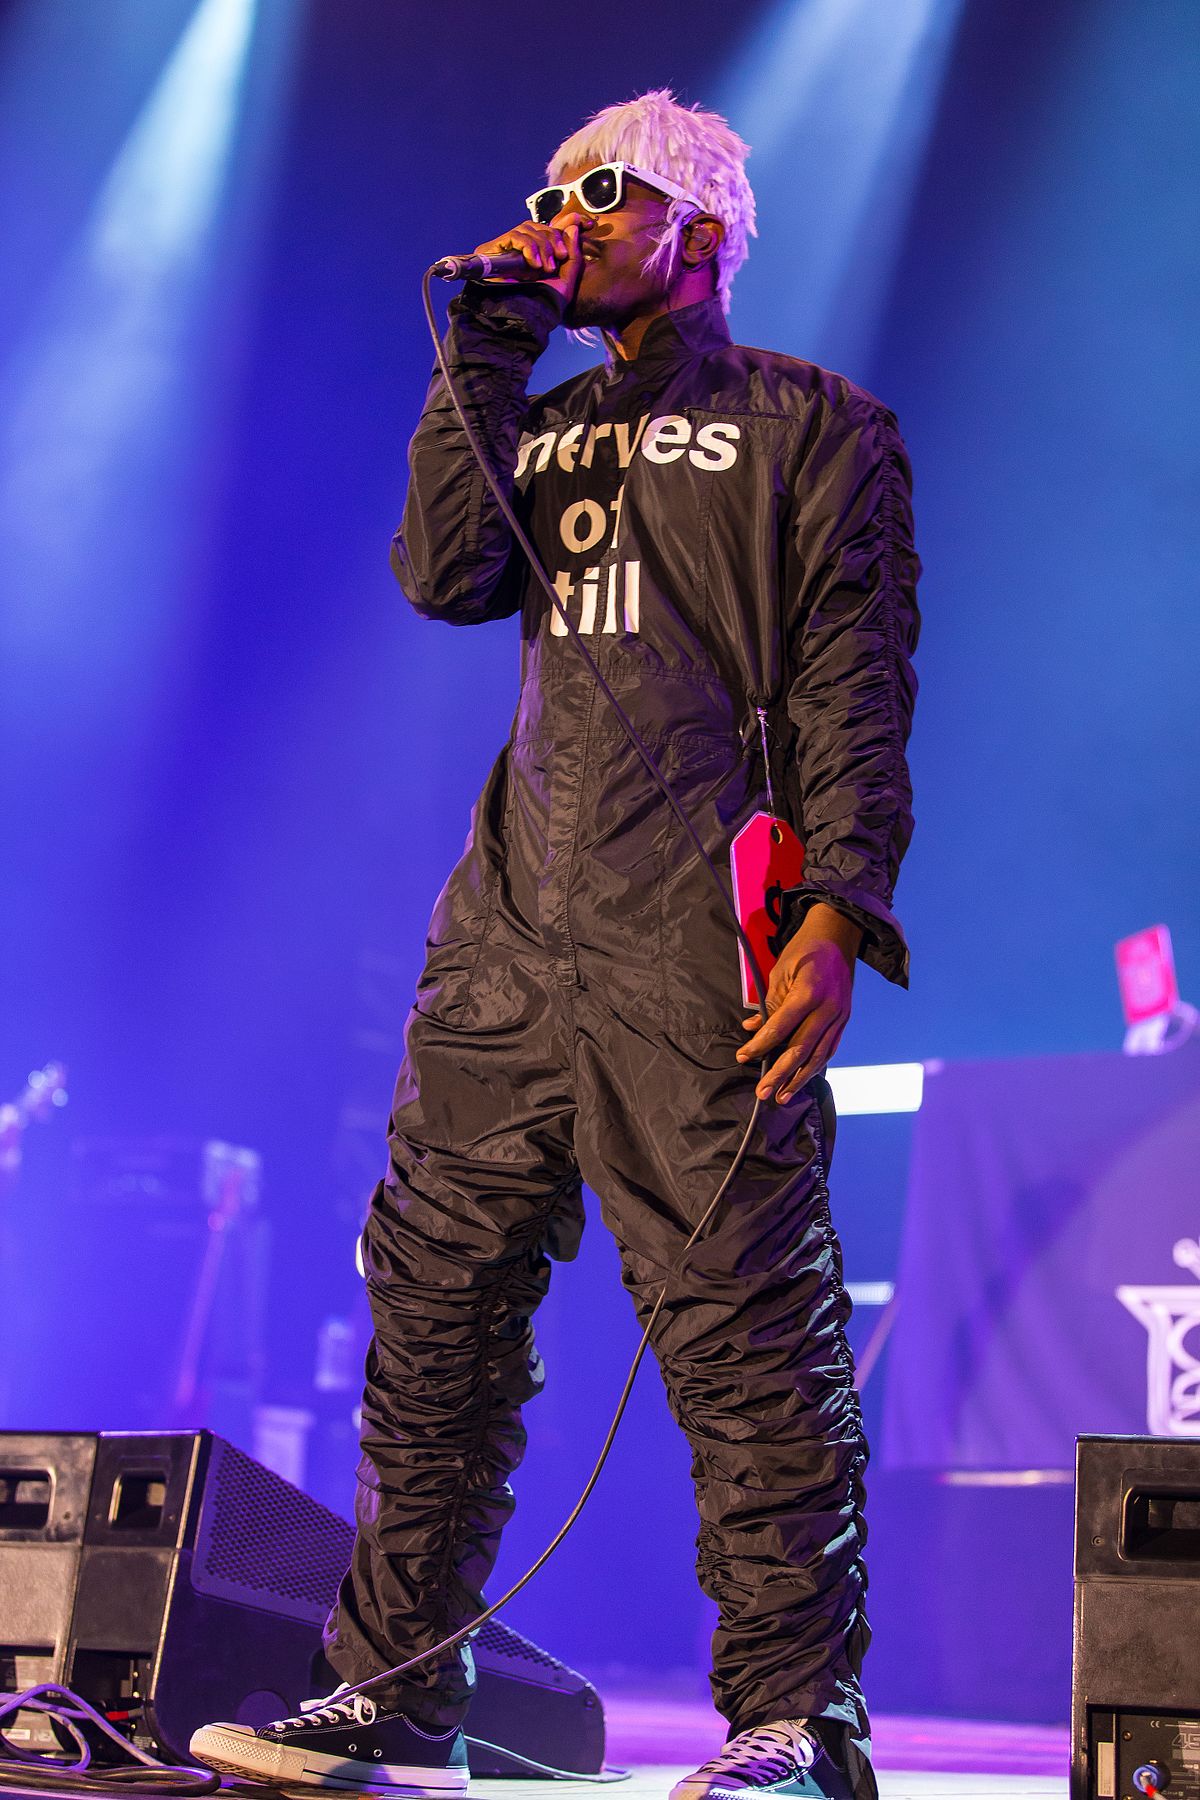 André 3000 - Wikipedia